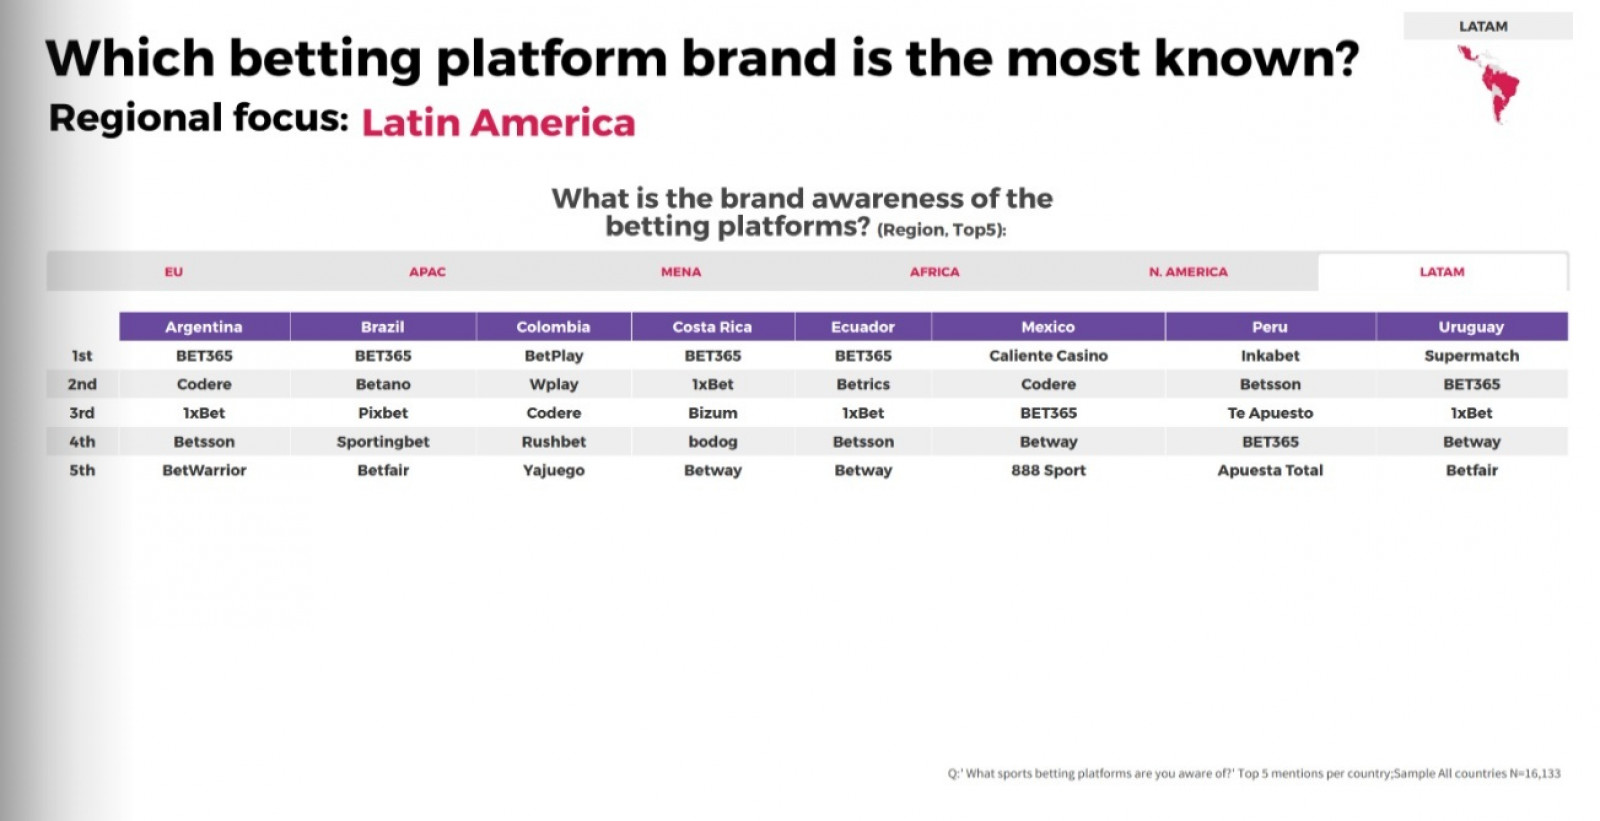 An overview of betting platform brand awareness in LatAm - Image